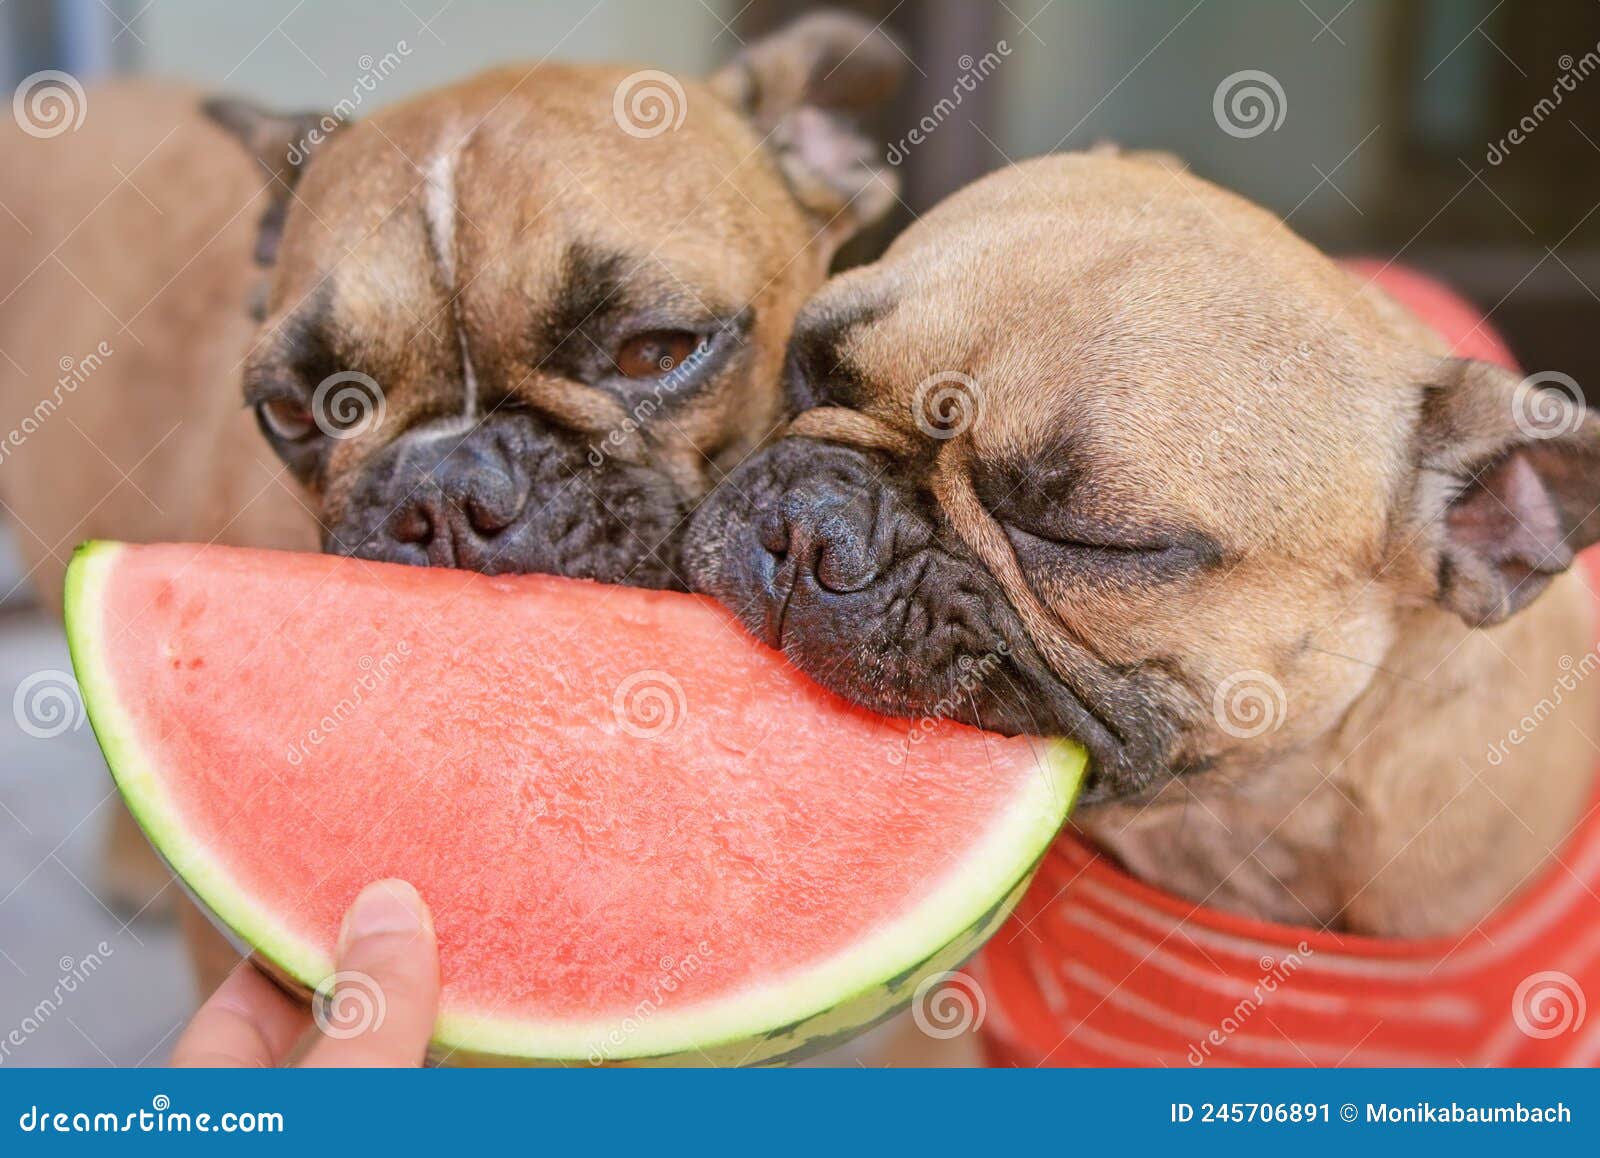 what fruit can french bulldogs eat